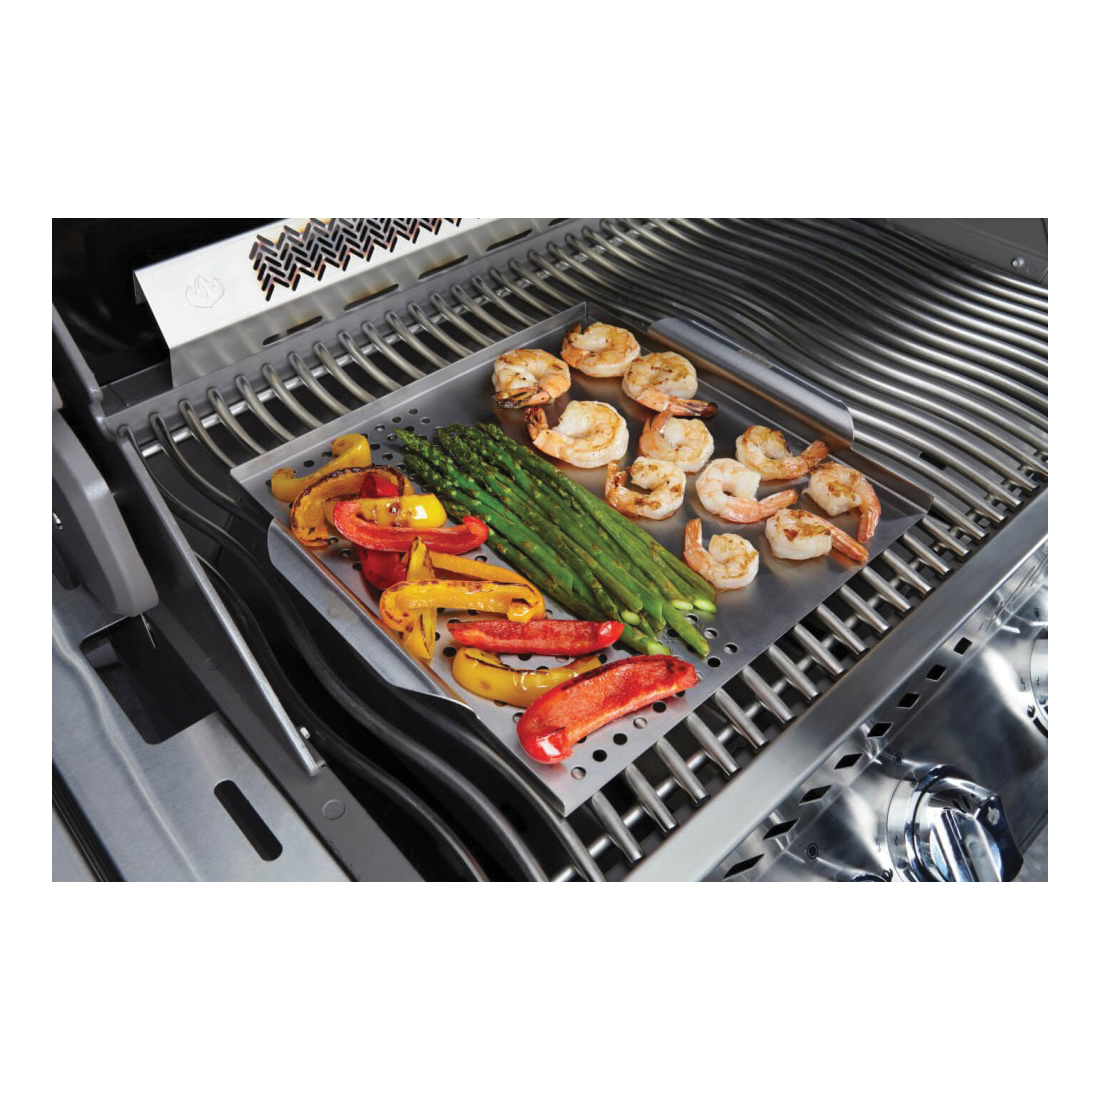 Napoleon 70026 Multi-Functional Grill Topper with Cedar Plank, Stainless Steel - 4